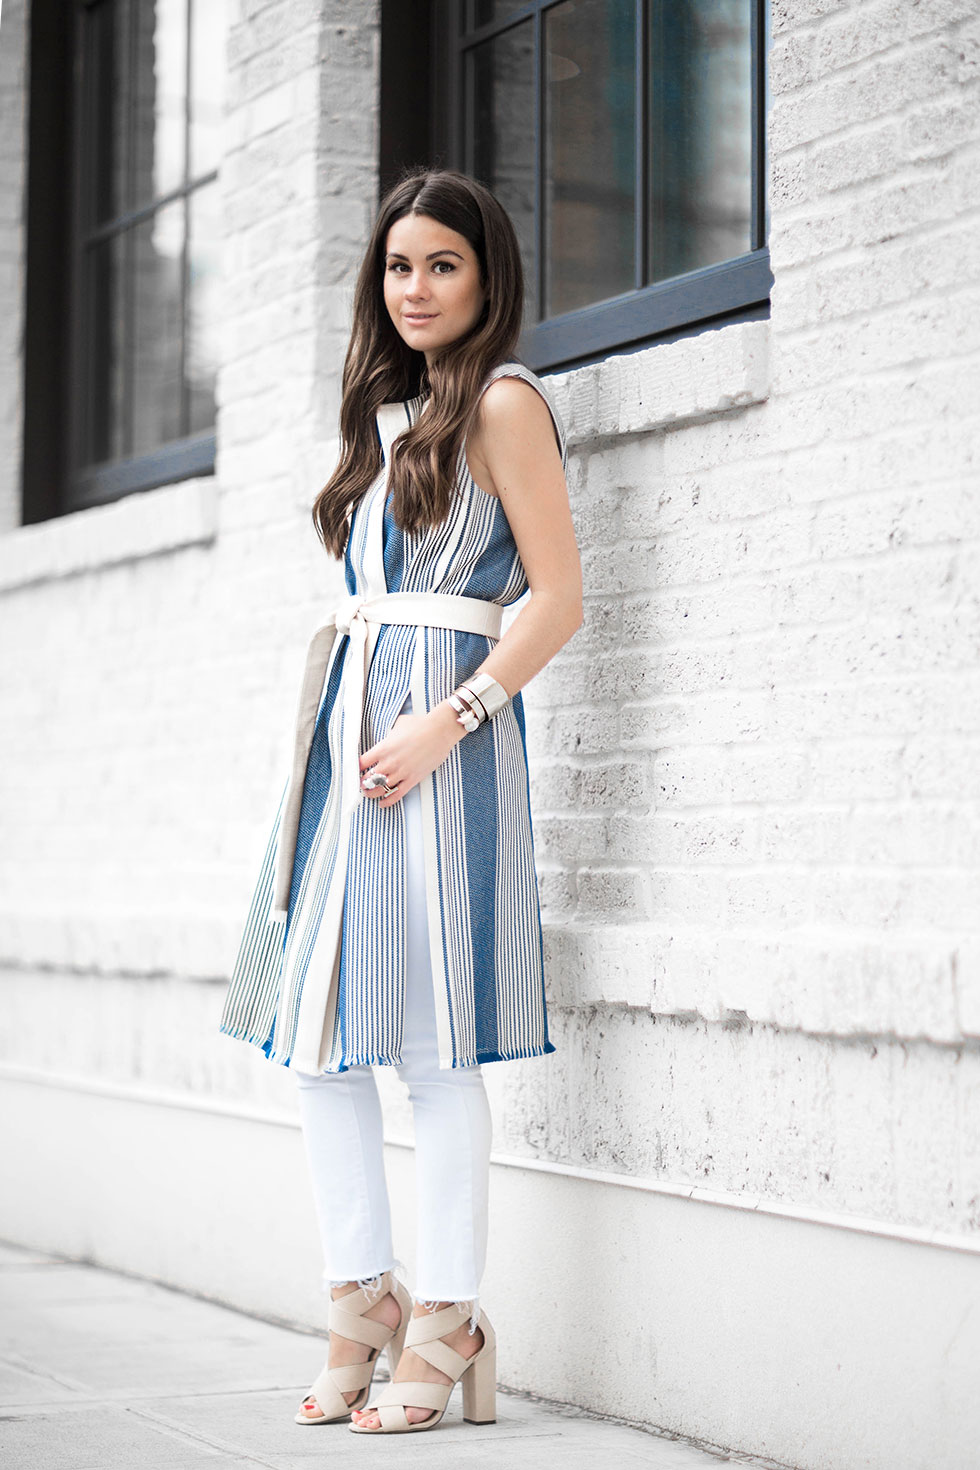 How to wear a belted stripe vest this spring featuring Lafayette 148 New York Fergie Belted Striped Vest